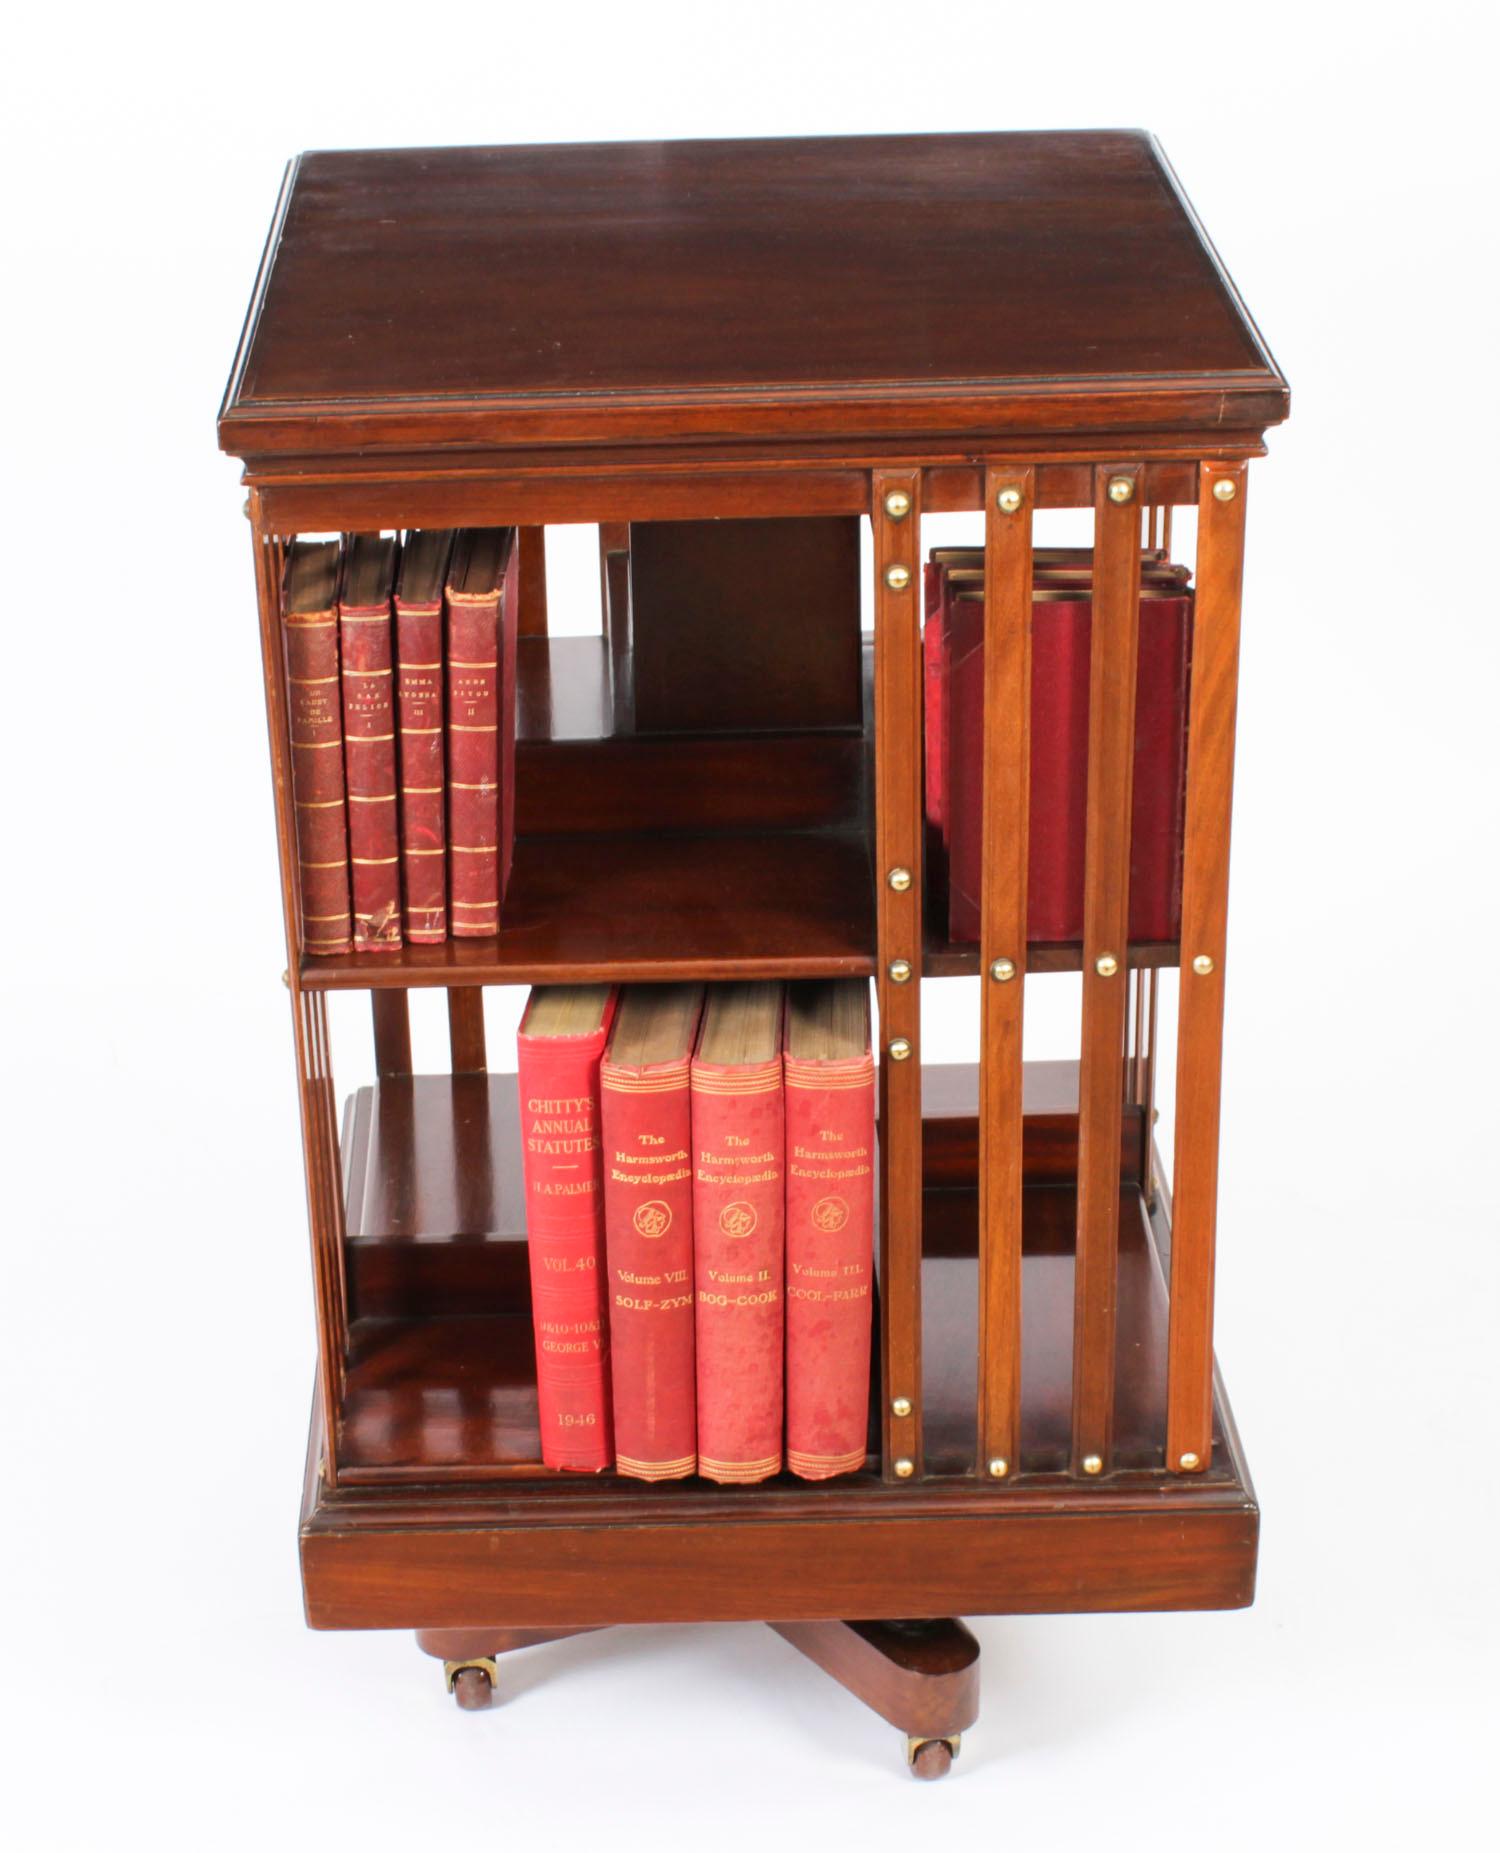 This an exquisite antique revolving bookcase attributed to the renowned Victorian retailer and manufacturer Maple & Co., circa 1900 in date.
 
It is made of mahogany, revolves on a solid cast iron base, the best quality Edwardian revolving